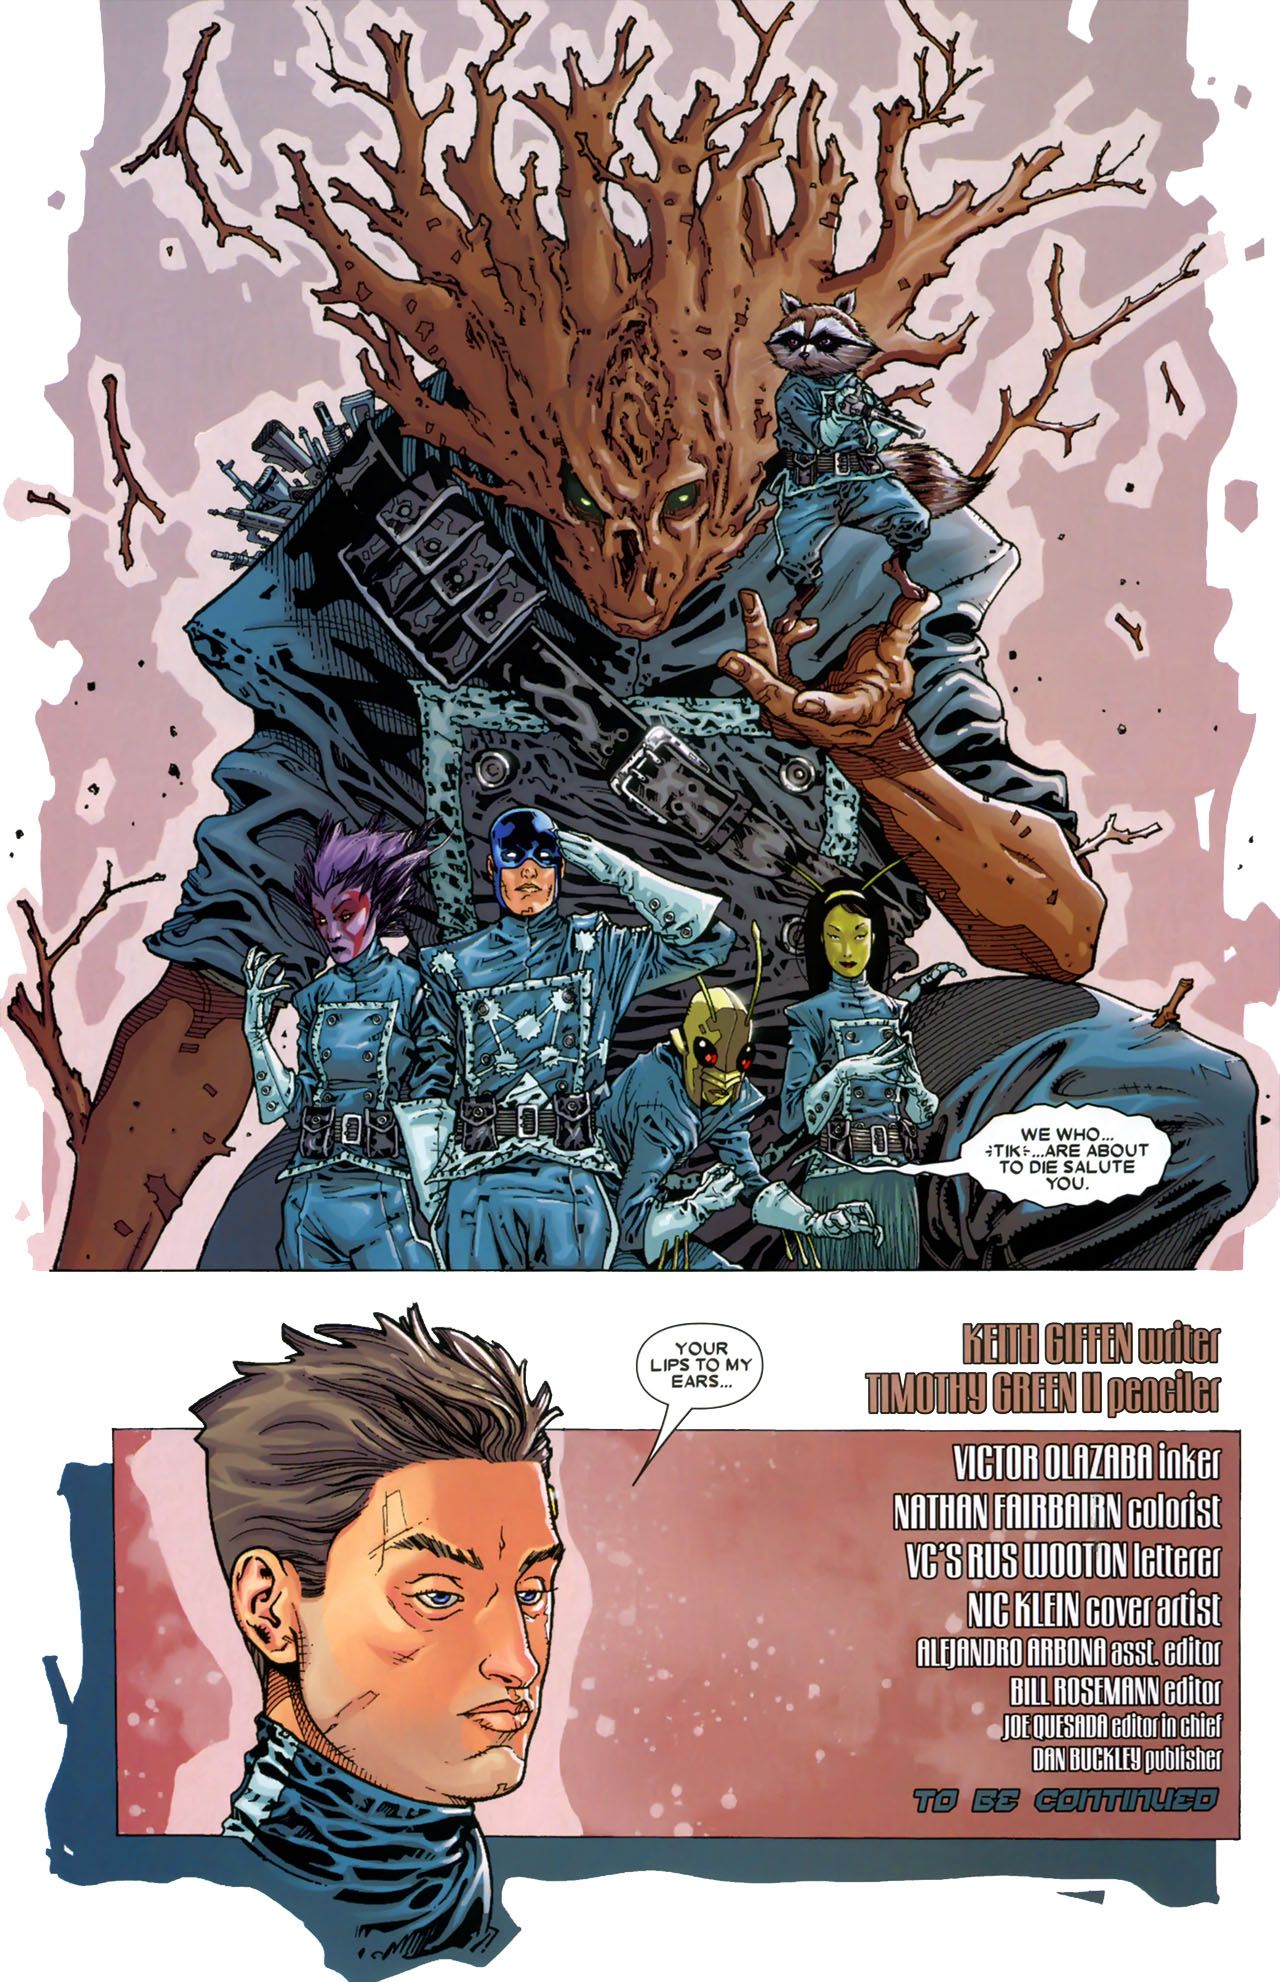 Groot joins up with Rocket Raccoon